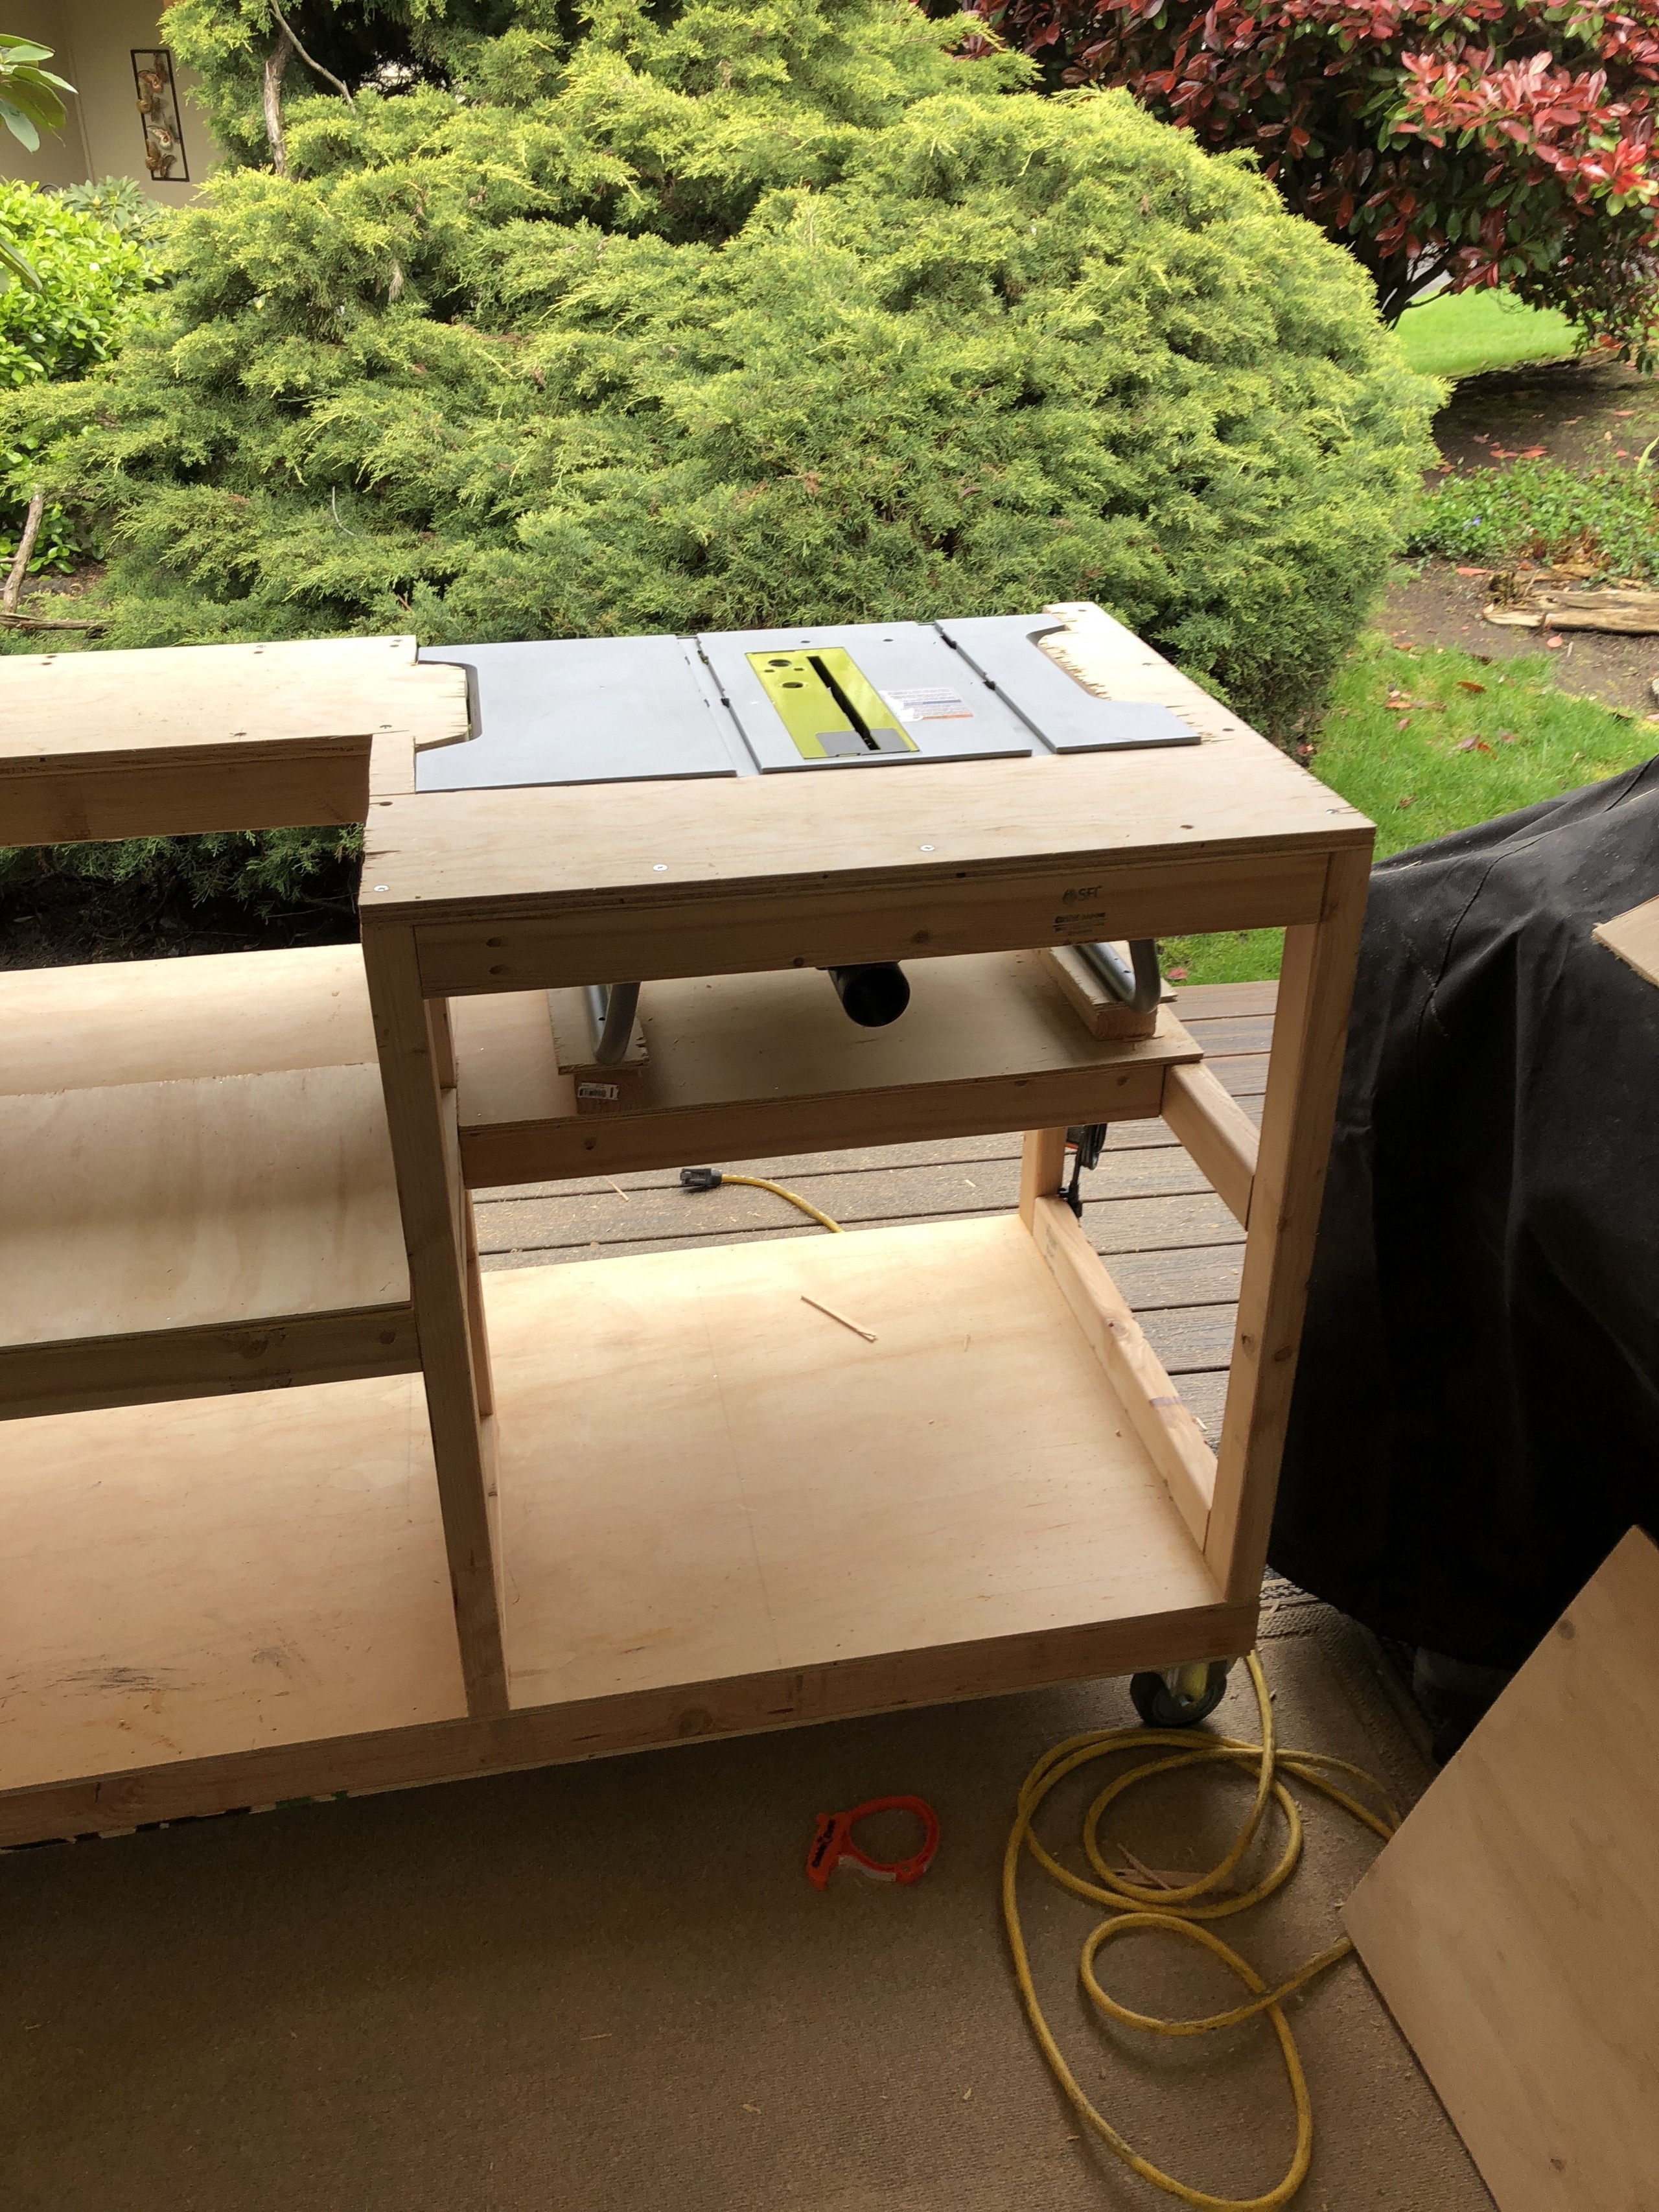 Portable work bench with images workbench decor